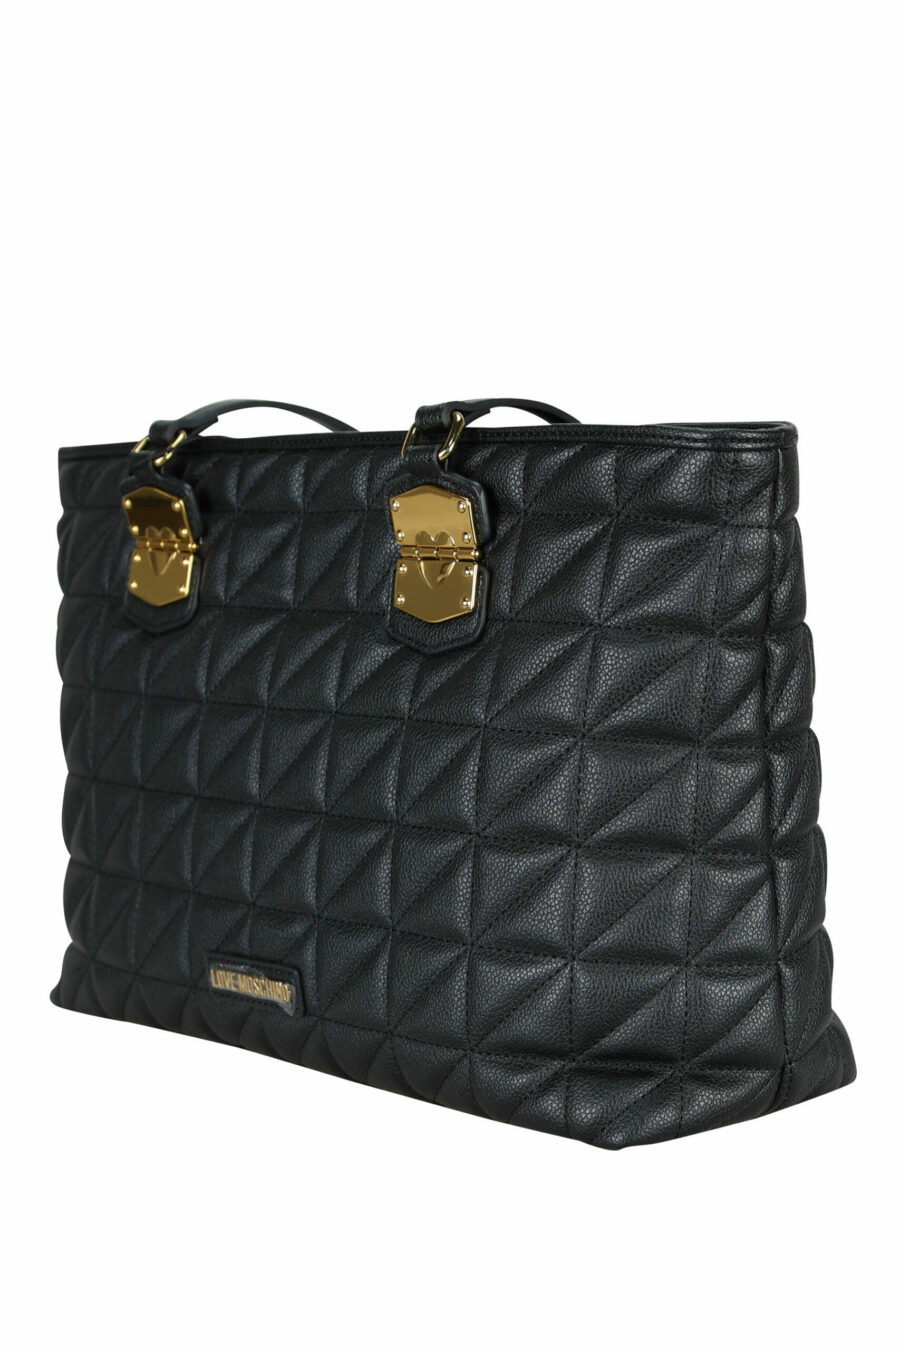 Black quilted shopper bag with gold lettering minilogue - 8050537994992 1 scaled